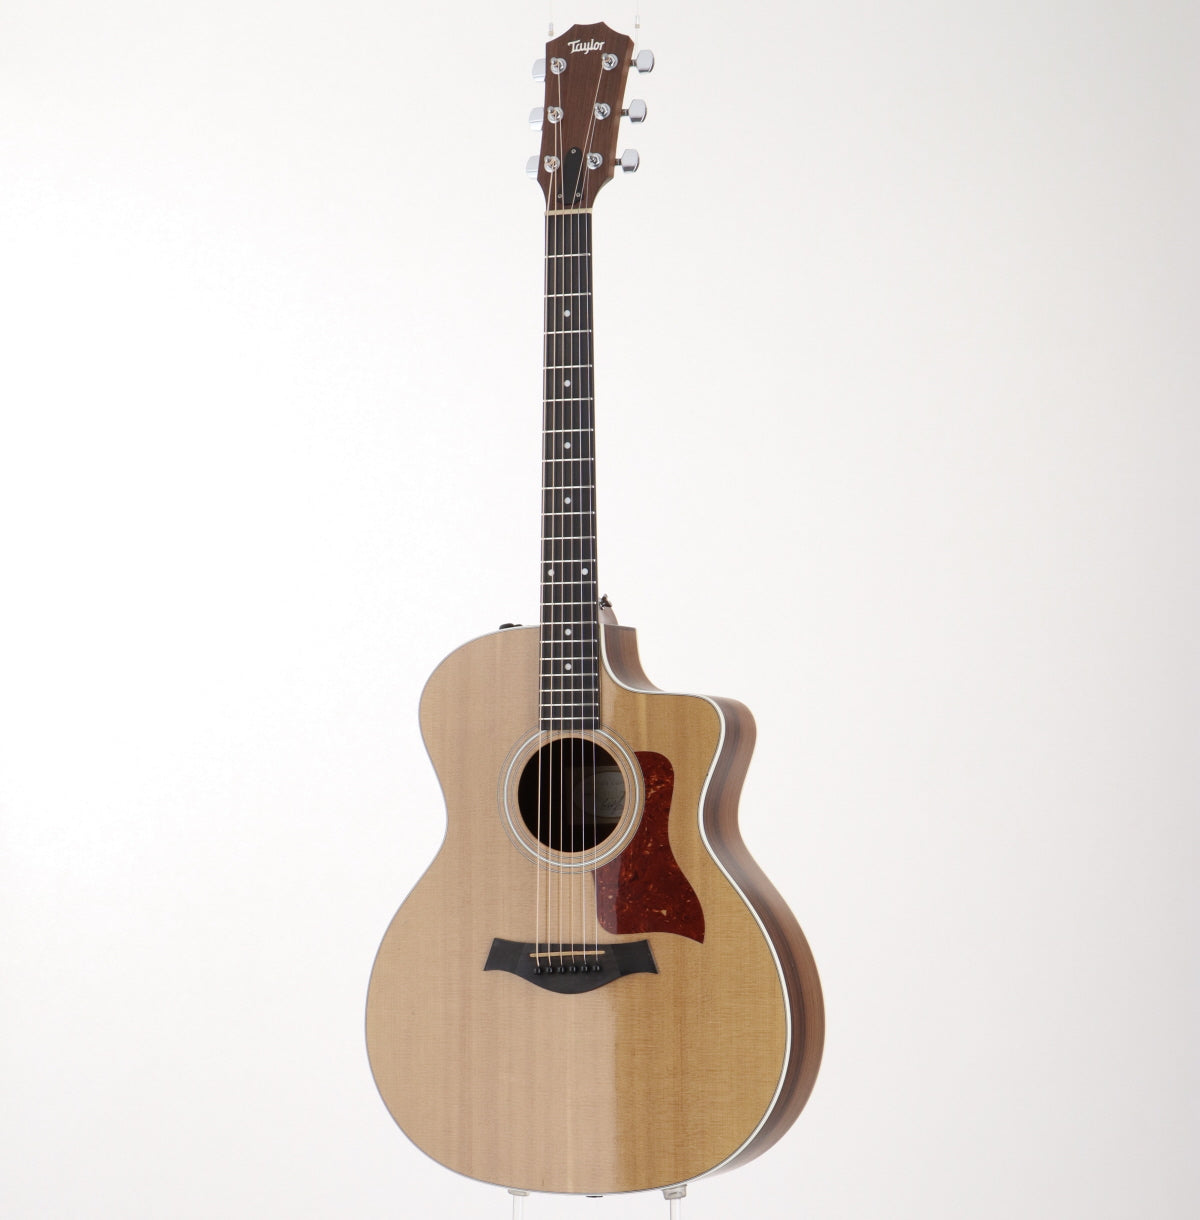 [SN 2103025158] USED Taylor / 214ce Natural 2015 [09]